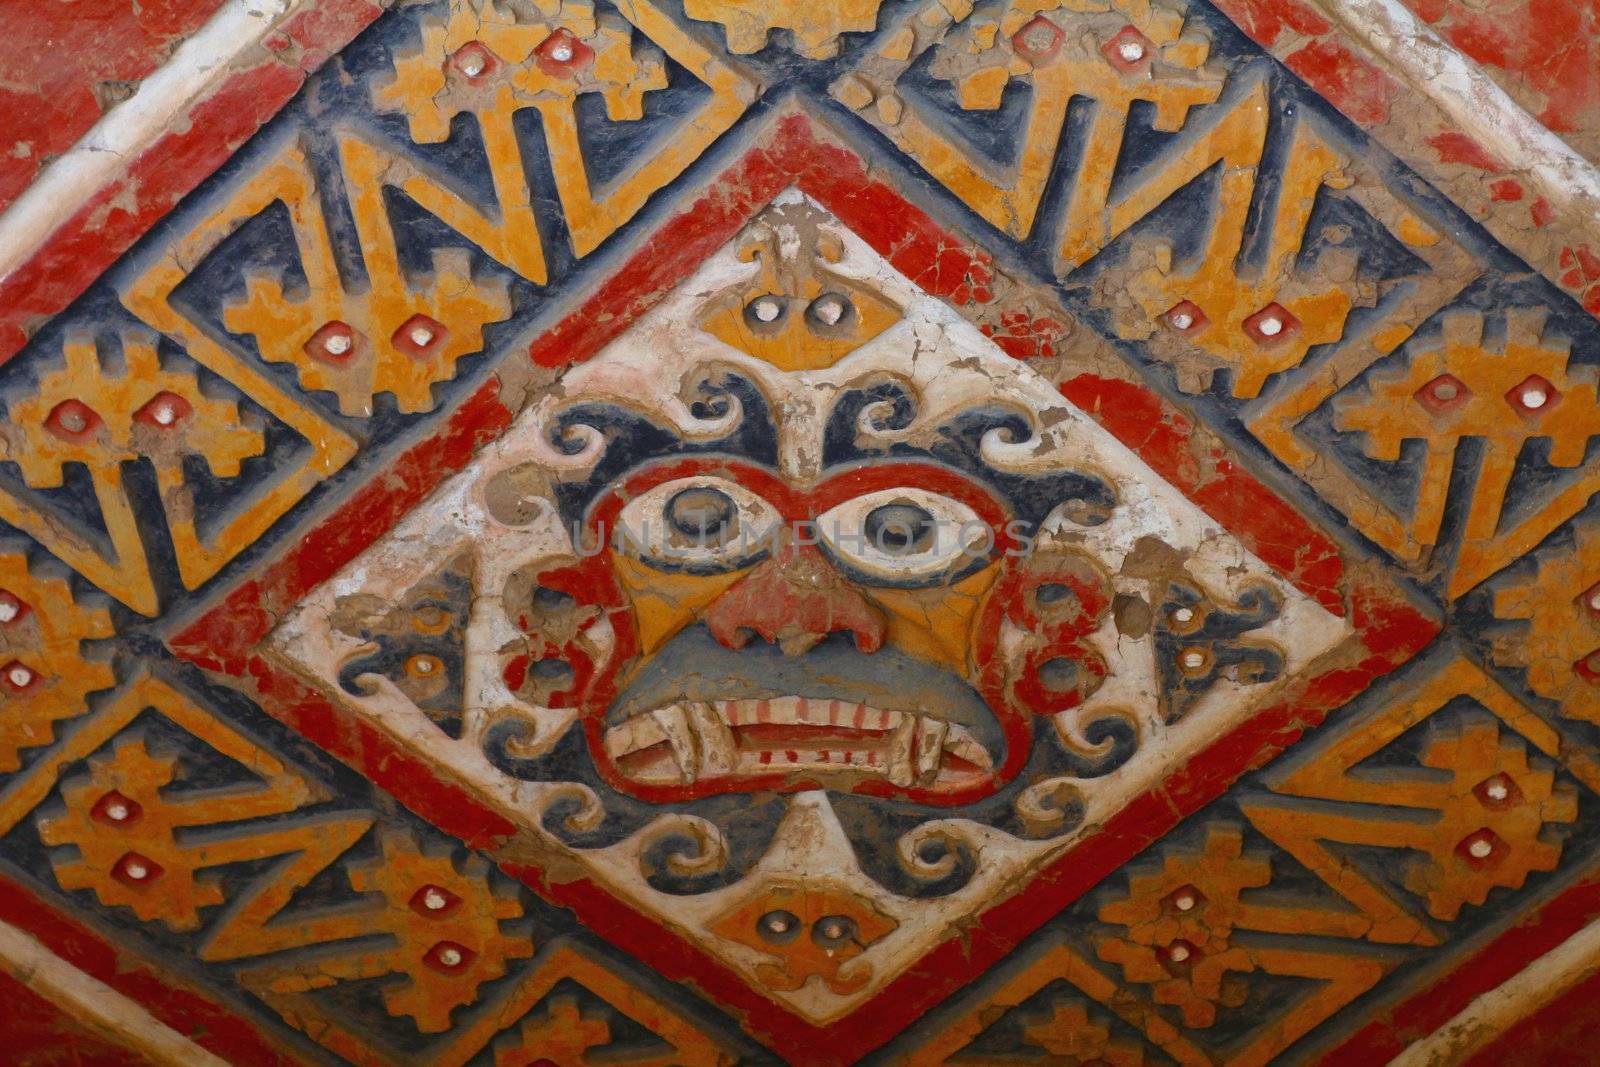 Painted religious figure on adobe wall in Huaca de la Luna archaeological site in the Moche valley, Peru
